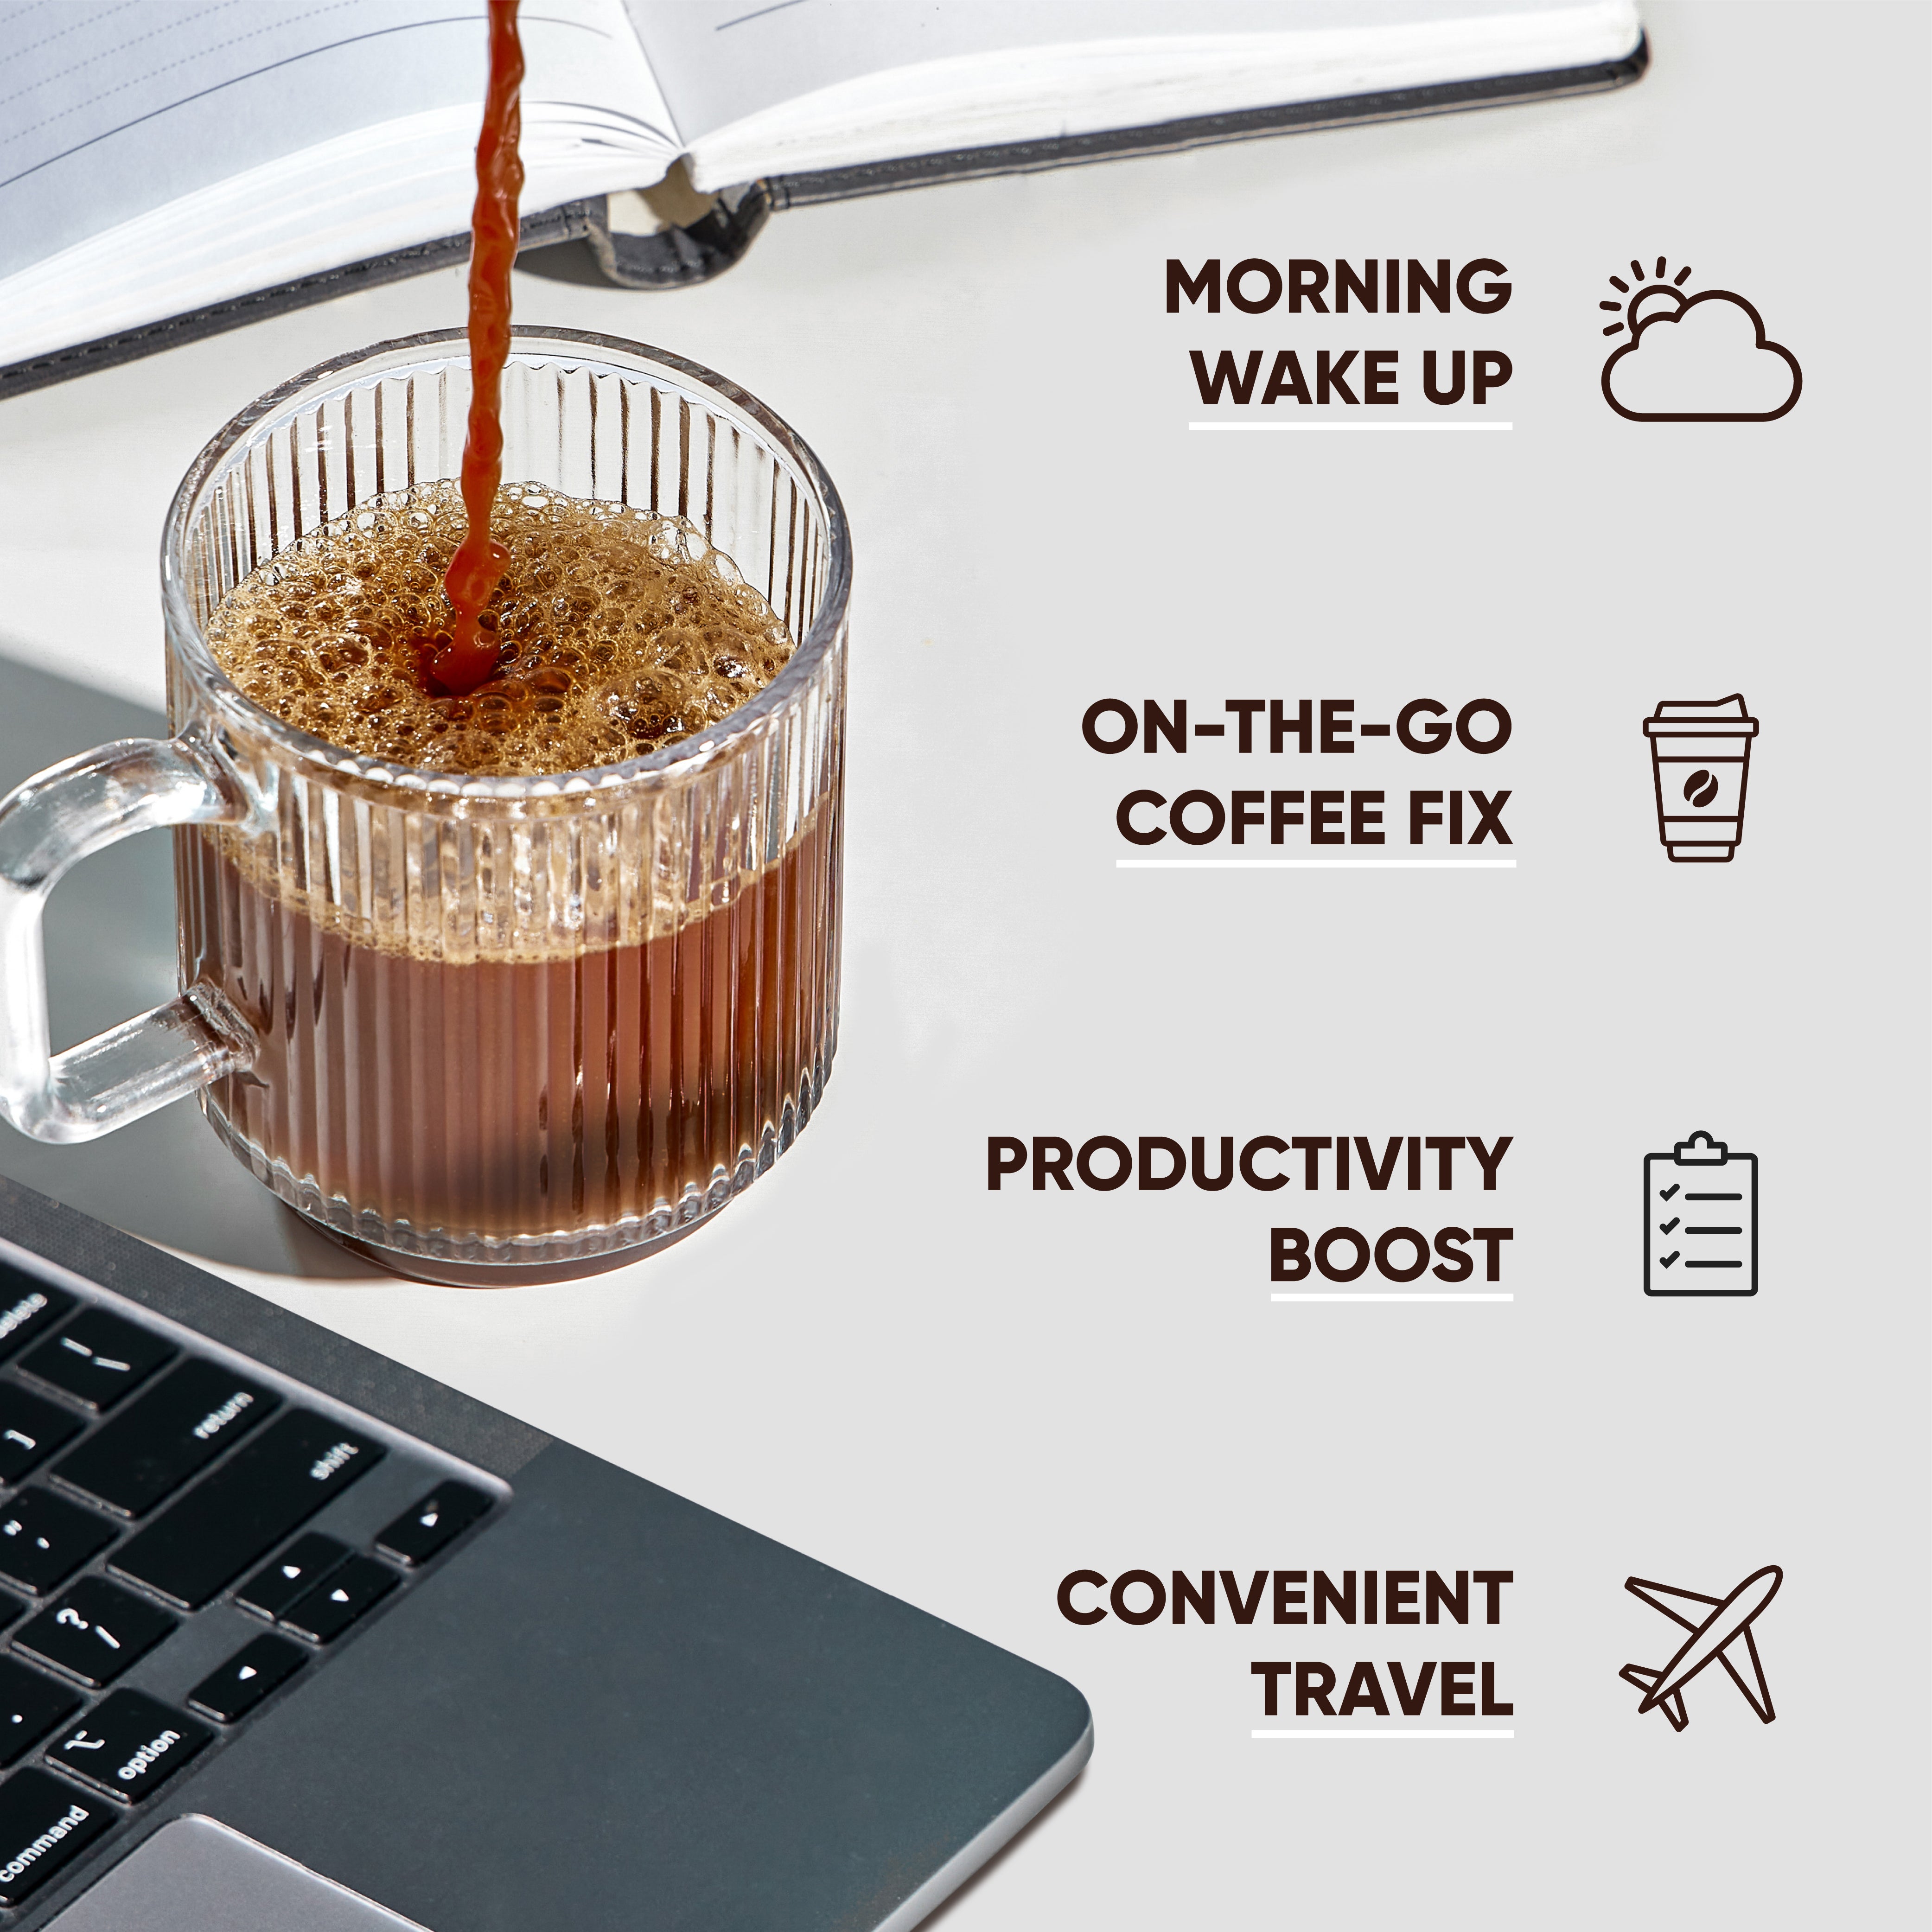 IQJOE Original Black Instant Coffee is great for: walking up in the morning, on-the-go coffee, productivity boost, convenient travel.